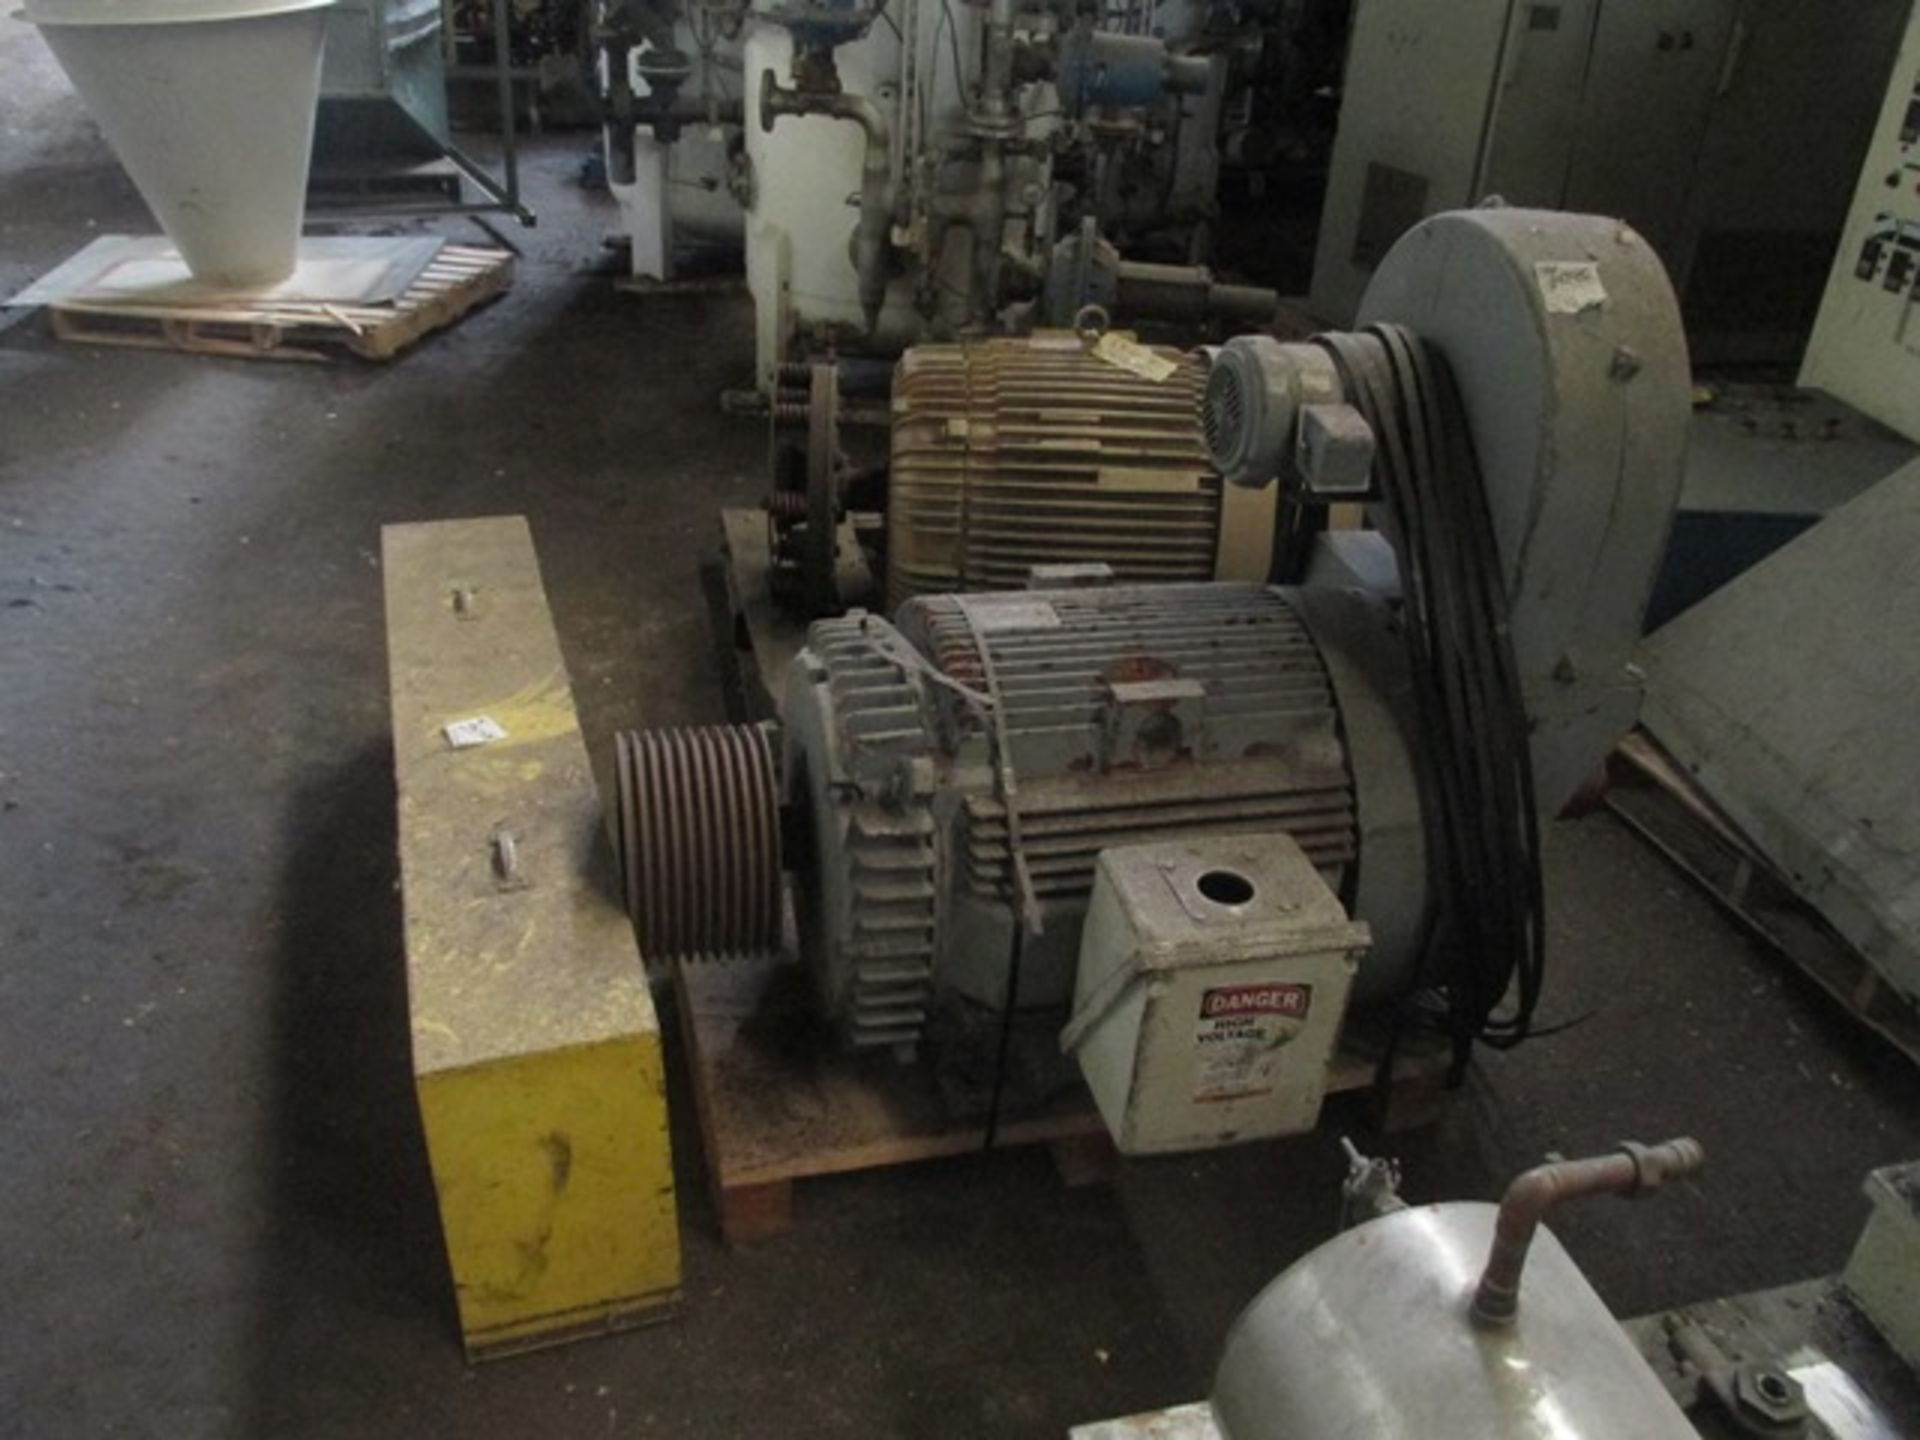 Macroplast Extrusion Tecnology 3" extruder, model ME-2-45026A1S-080-AC200V5, 36:1 L/D, electrically - Image 3 of 14